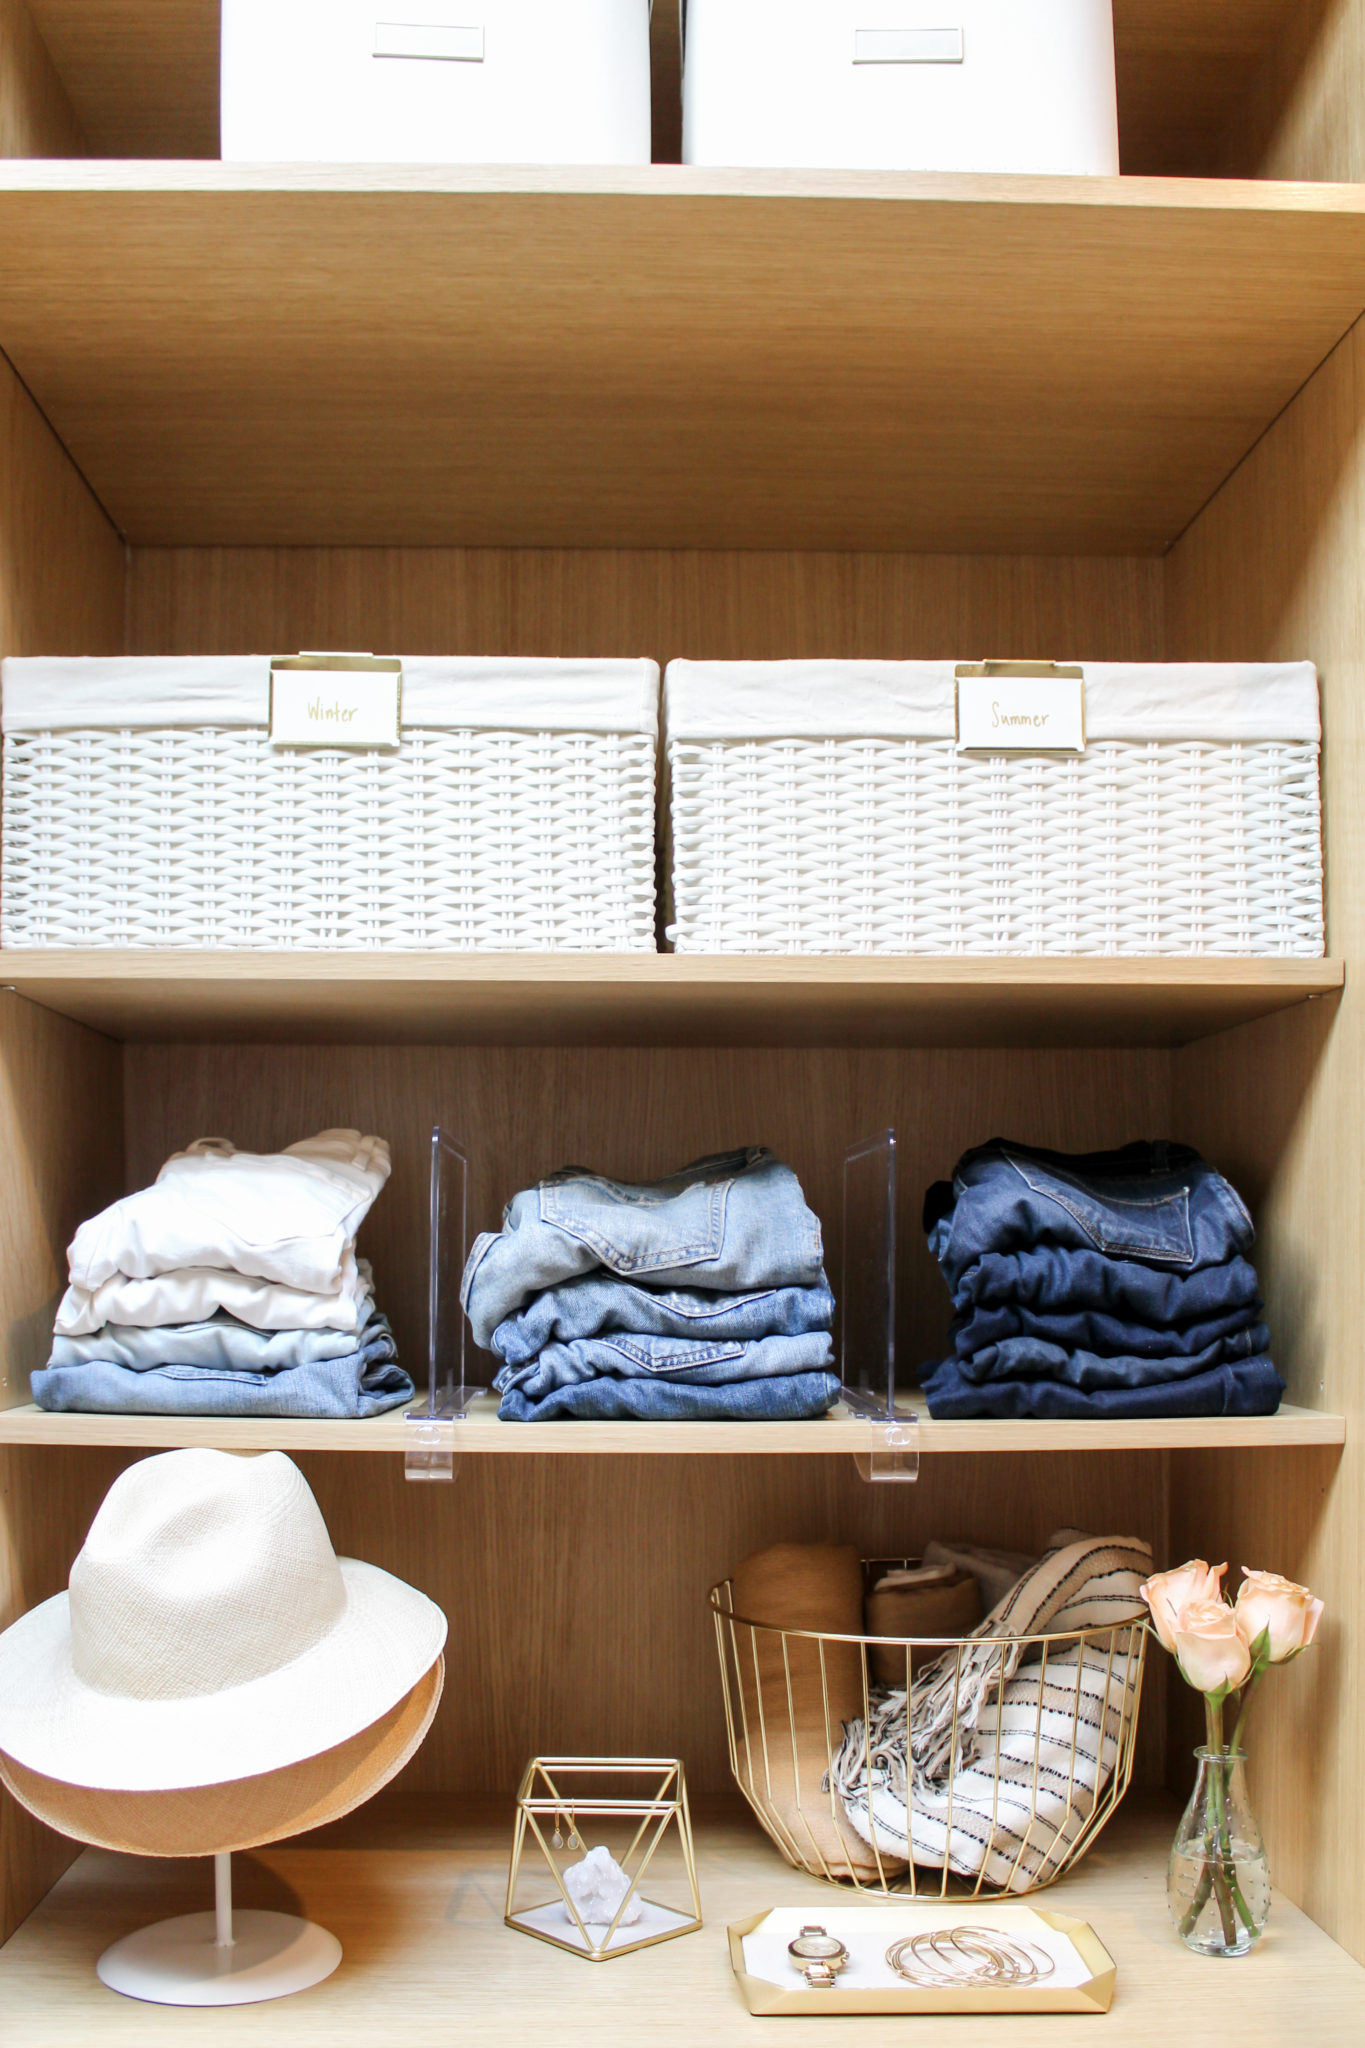 3 Ways to Get Organized Once and for All